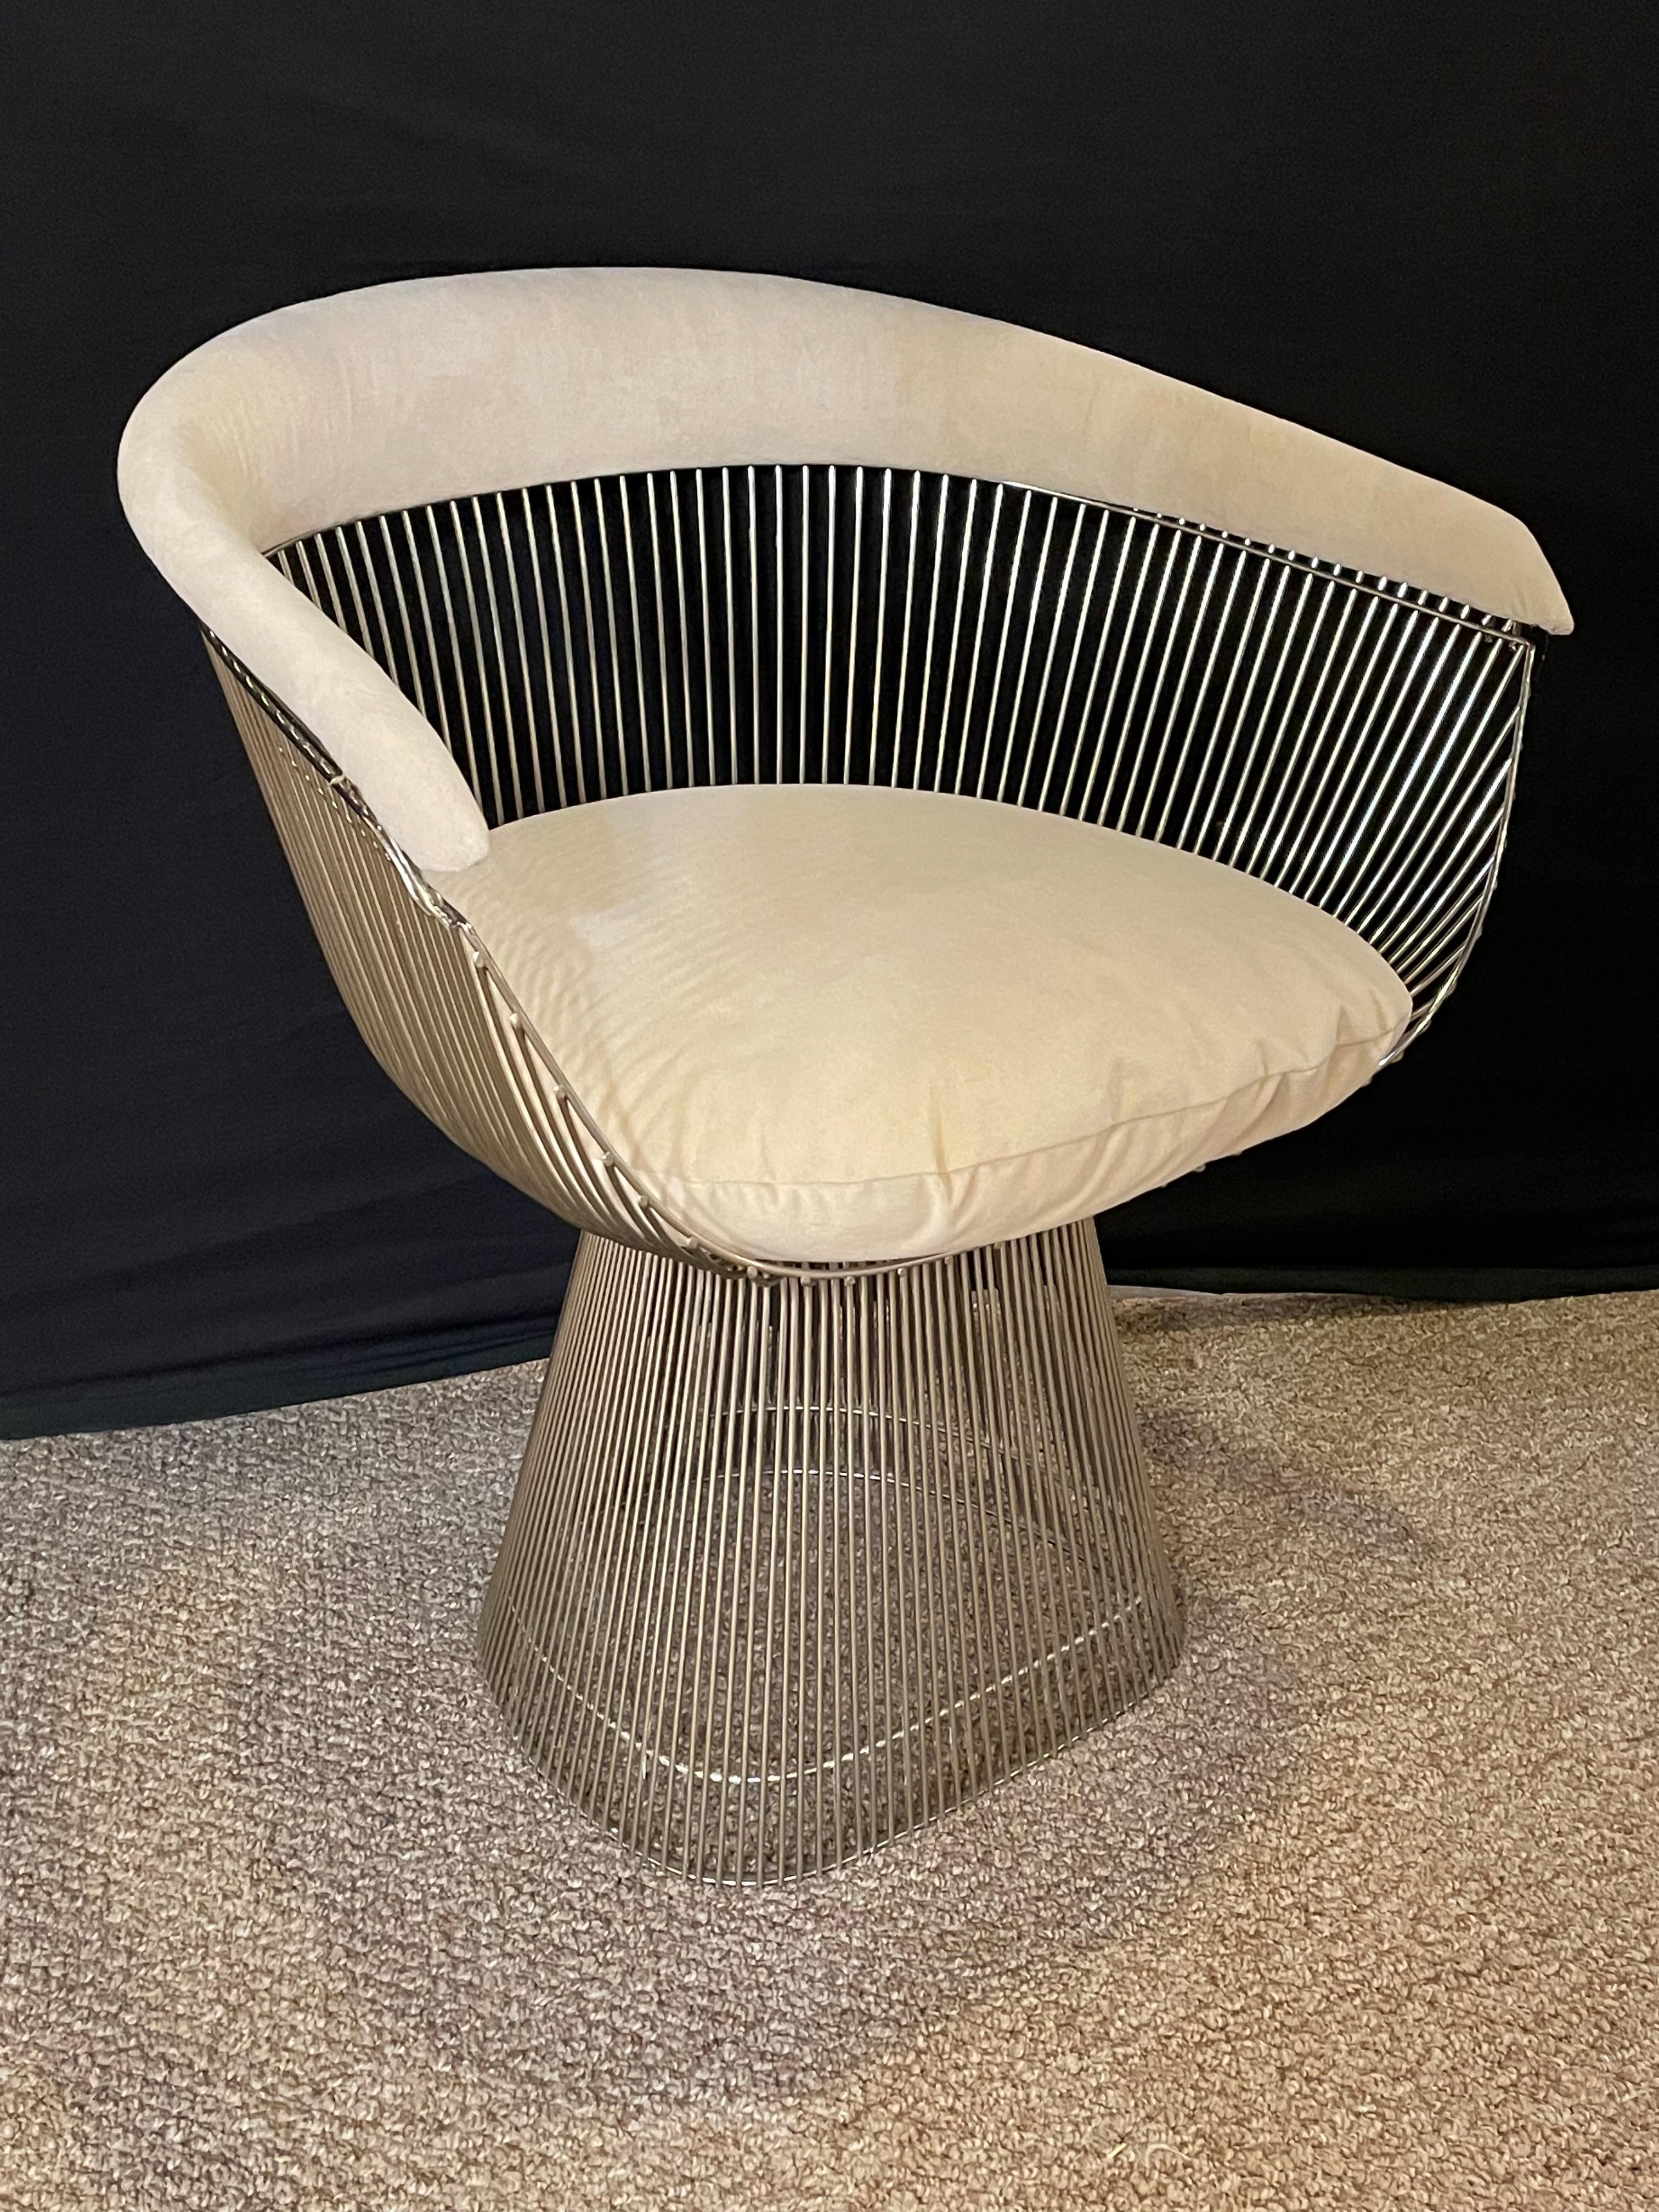 20th Century Warren Platner Set of Ten Dining Arm Chairs, Knoll, USA Chrome Plated Steel